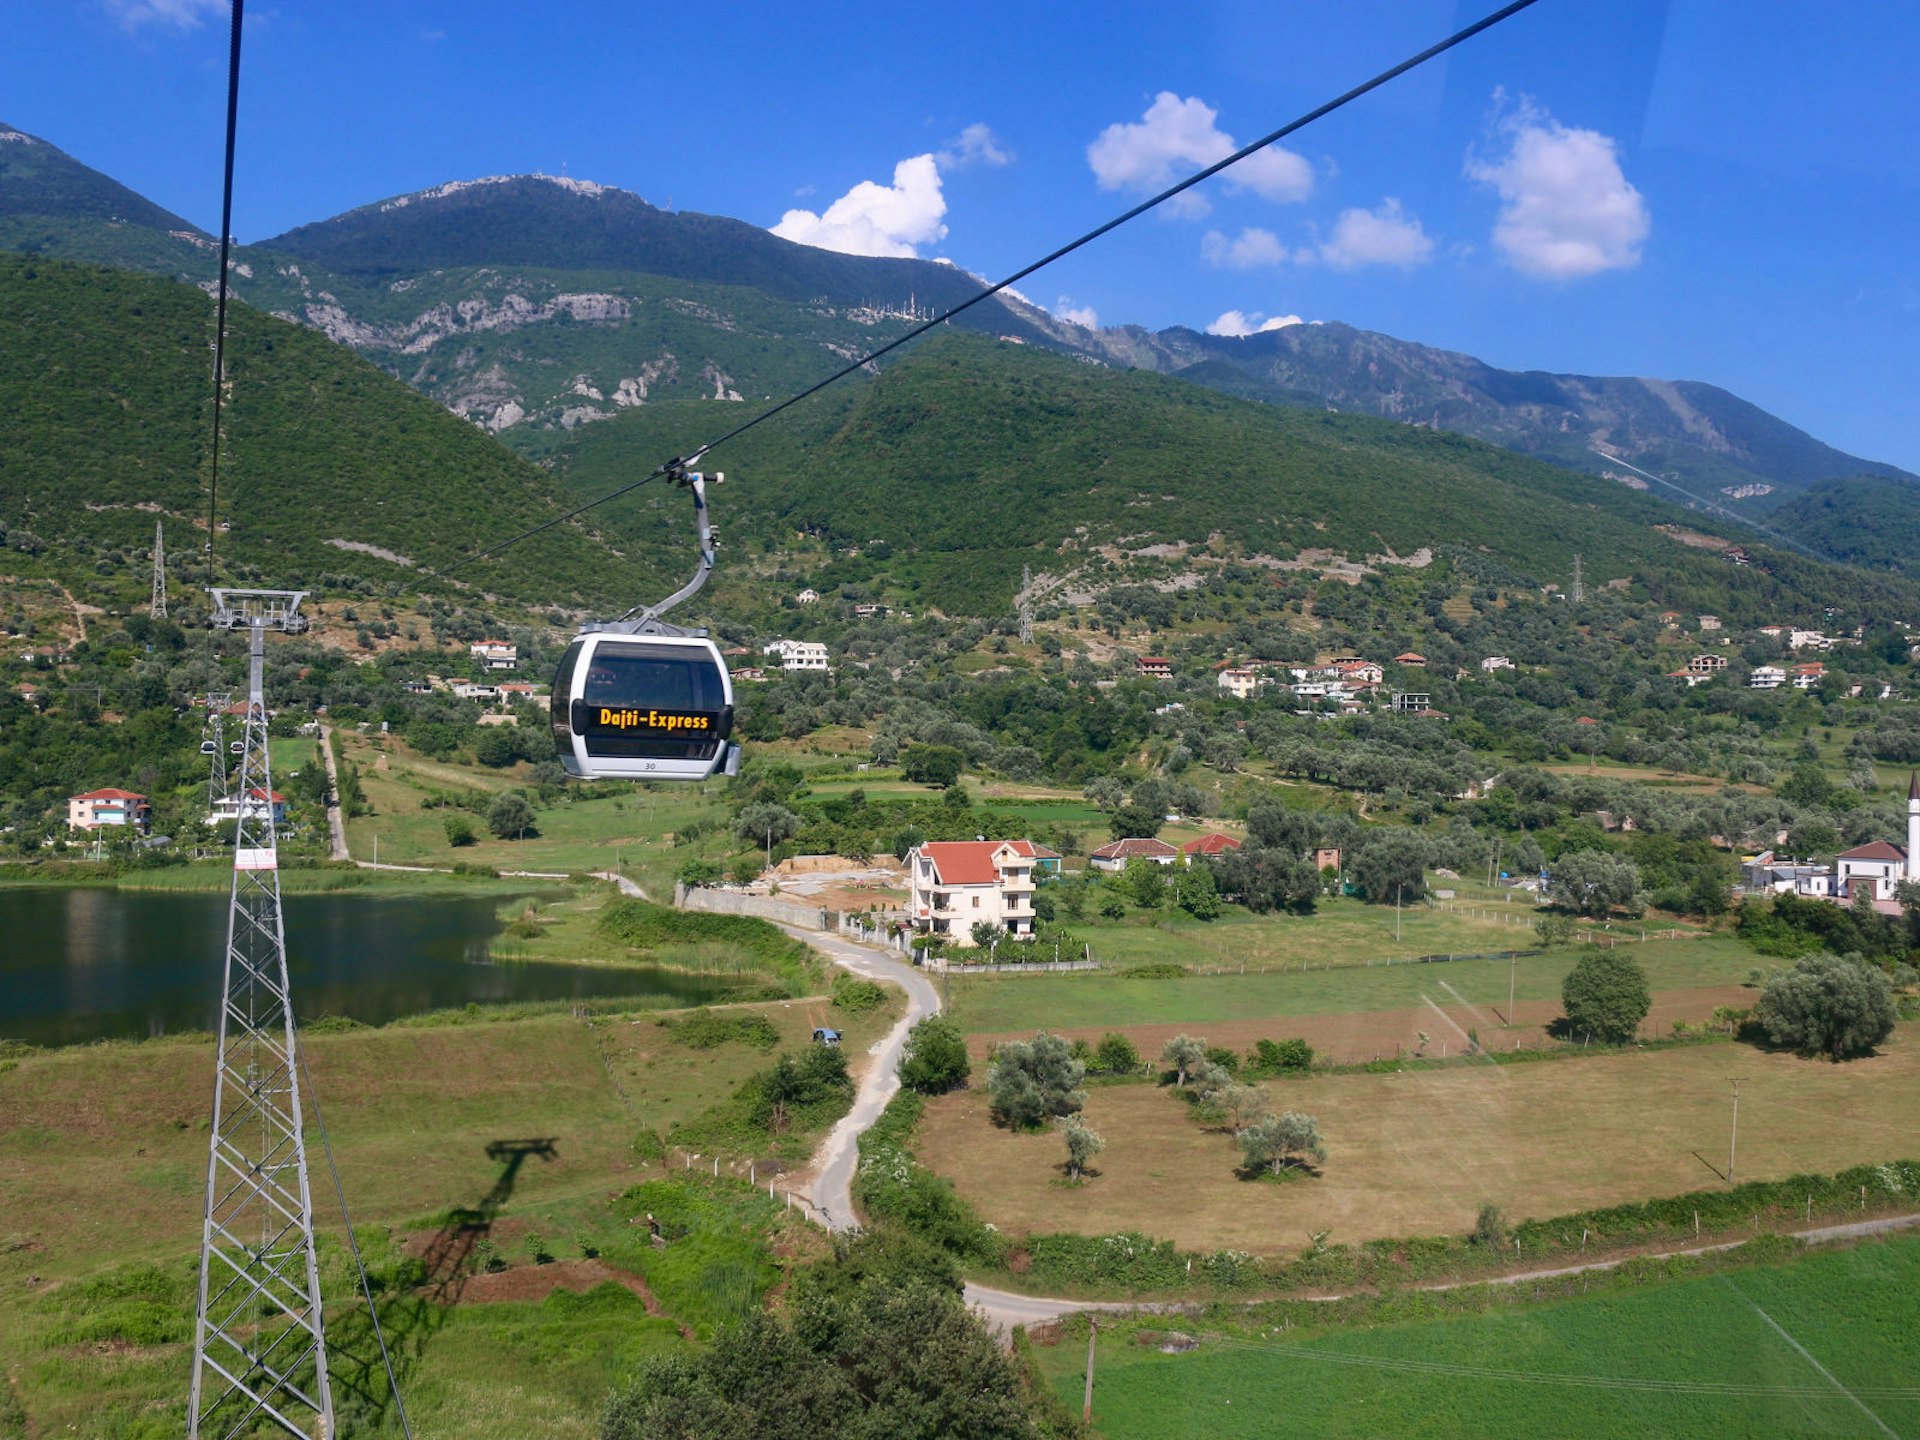 Views from the Dajti Express cable car © Bridget Nurre Jennions / Lonely Planet